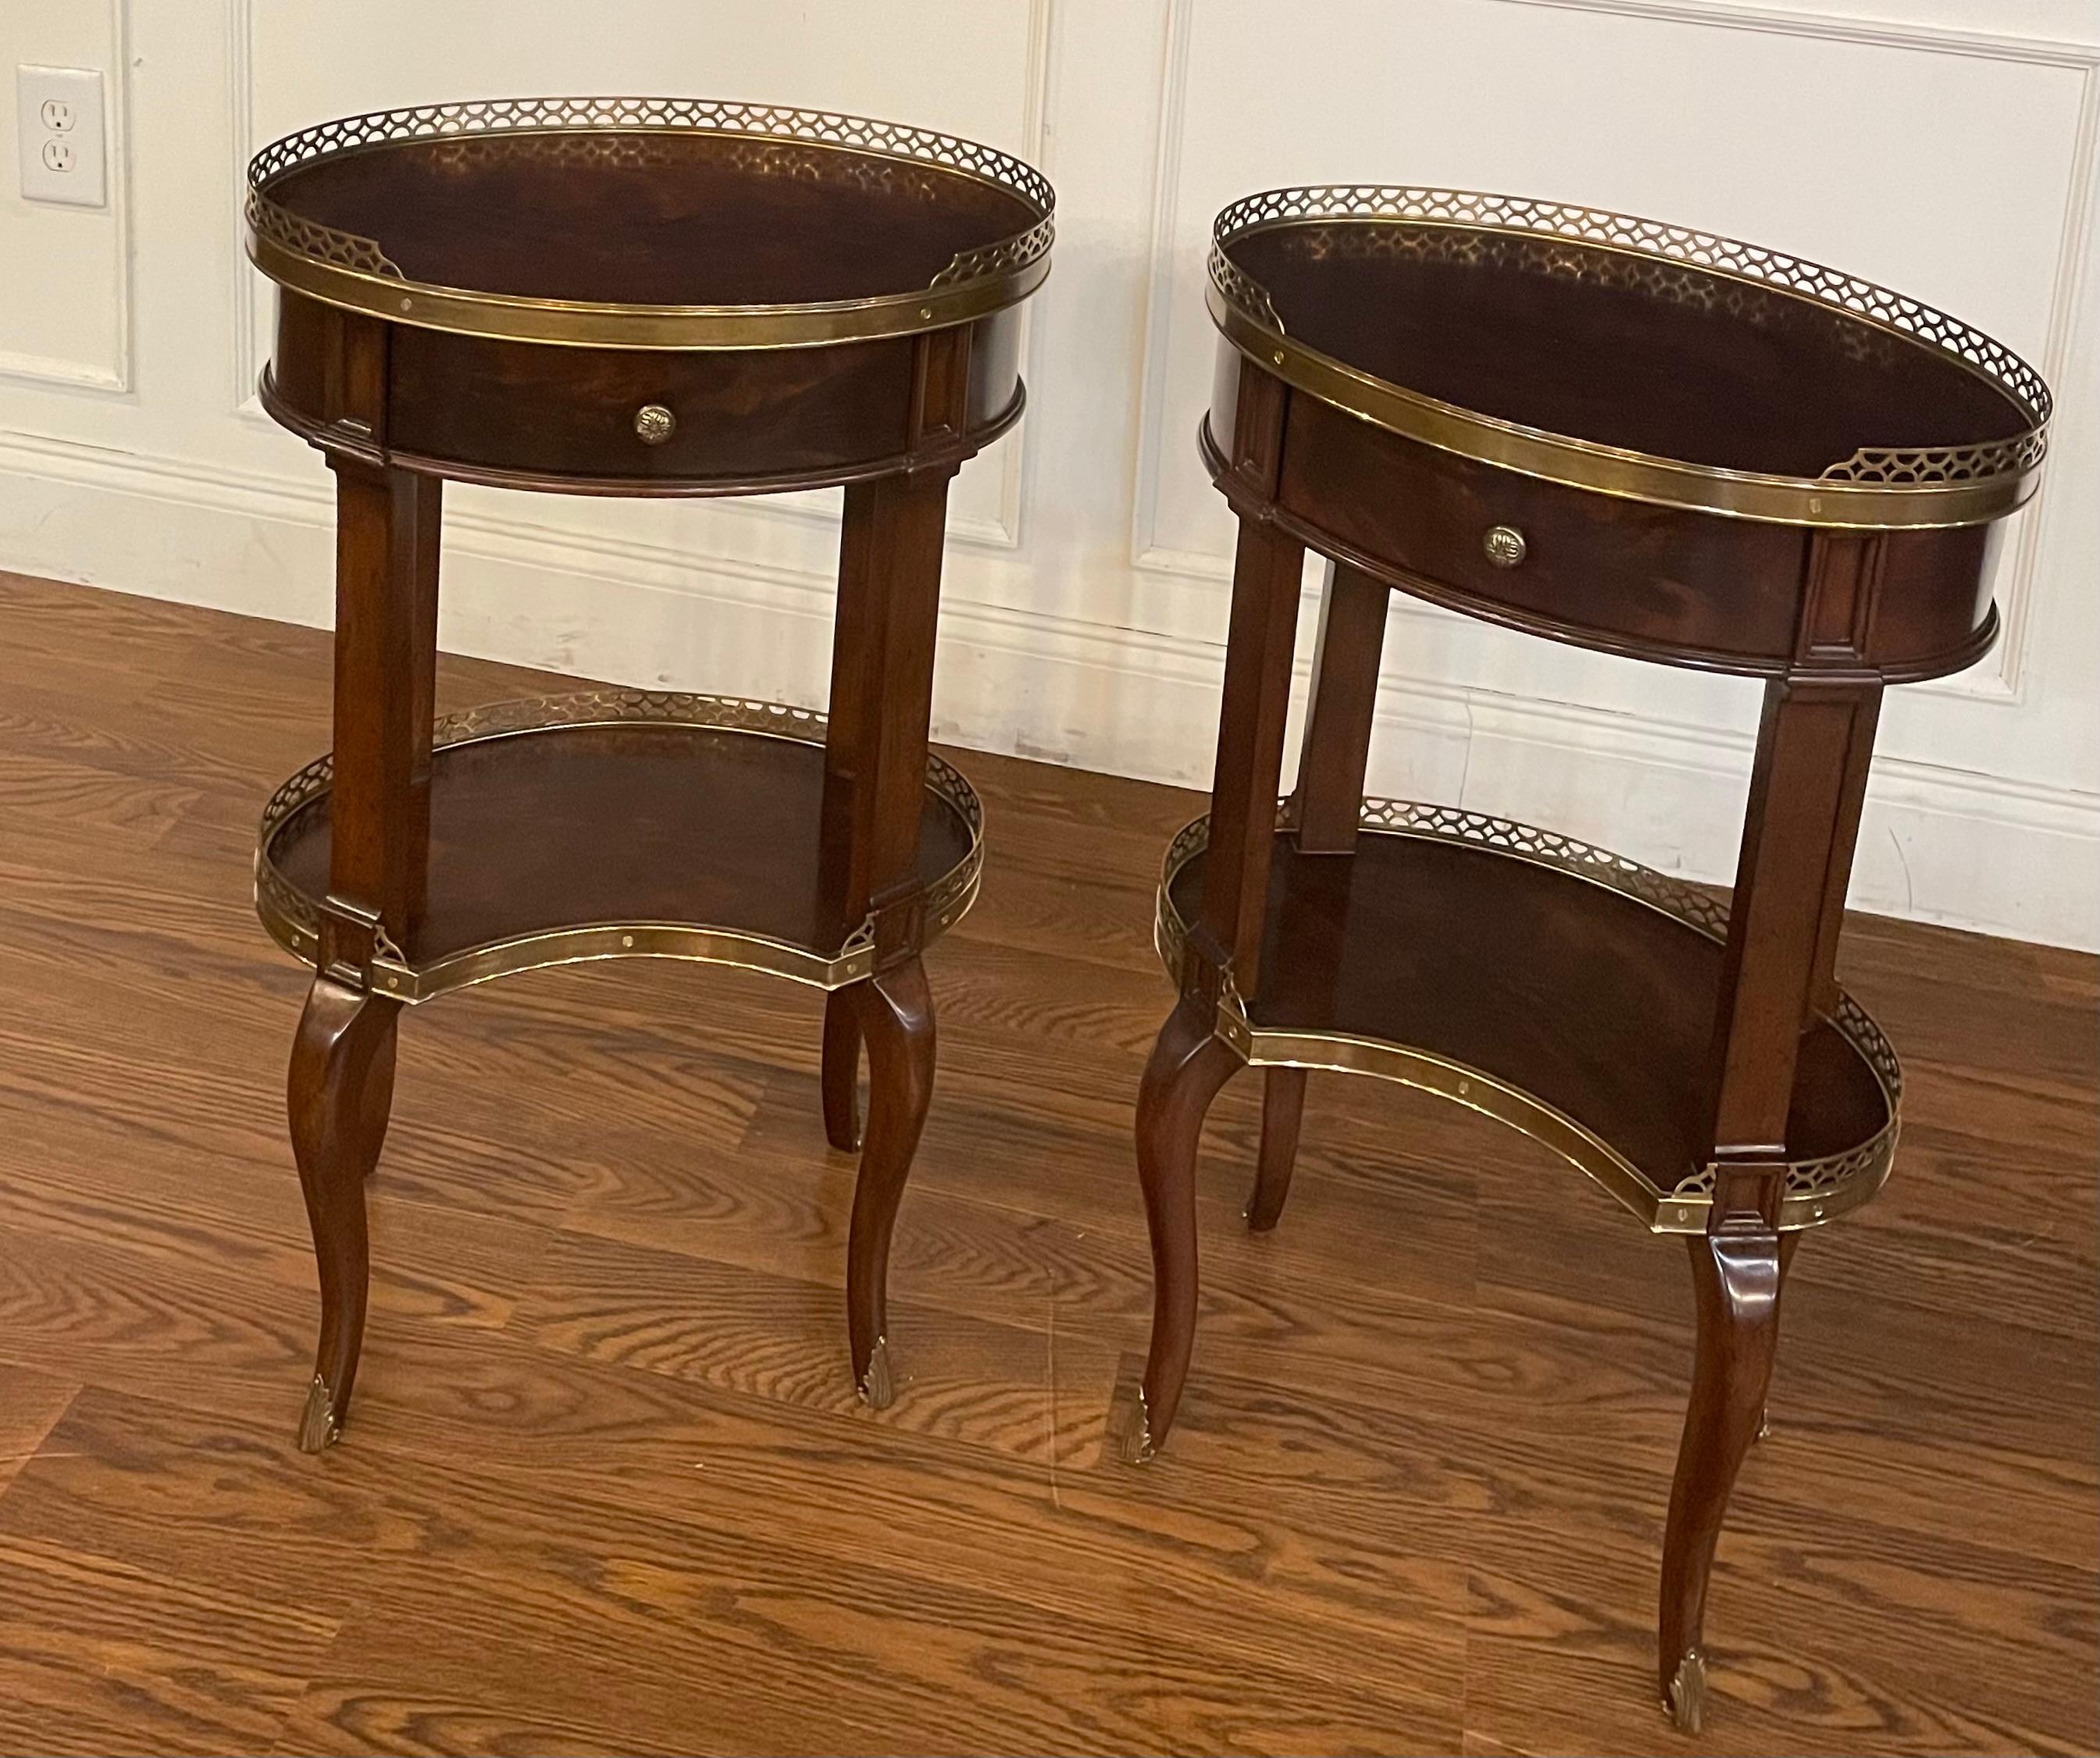 This is a pair (set of 2) Kidney shaped mahogany lamp/occasional tables by Leighton Hall.  They feature brass galleries and dovetailed drawers with solid brass pulls.  They have been used for less than one year as showroom samples and are in very